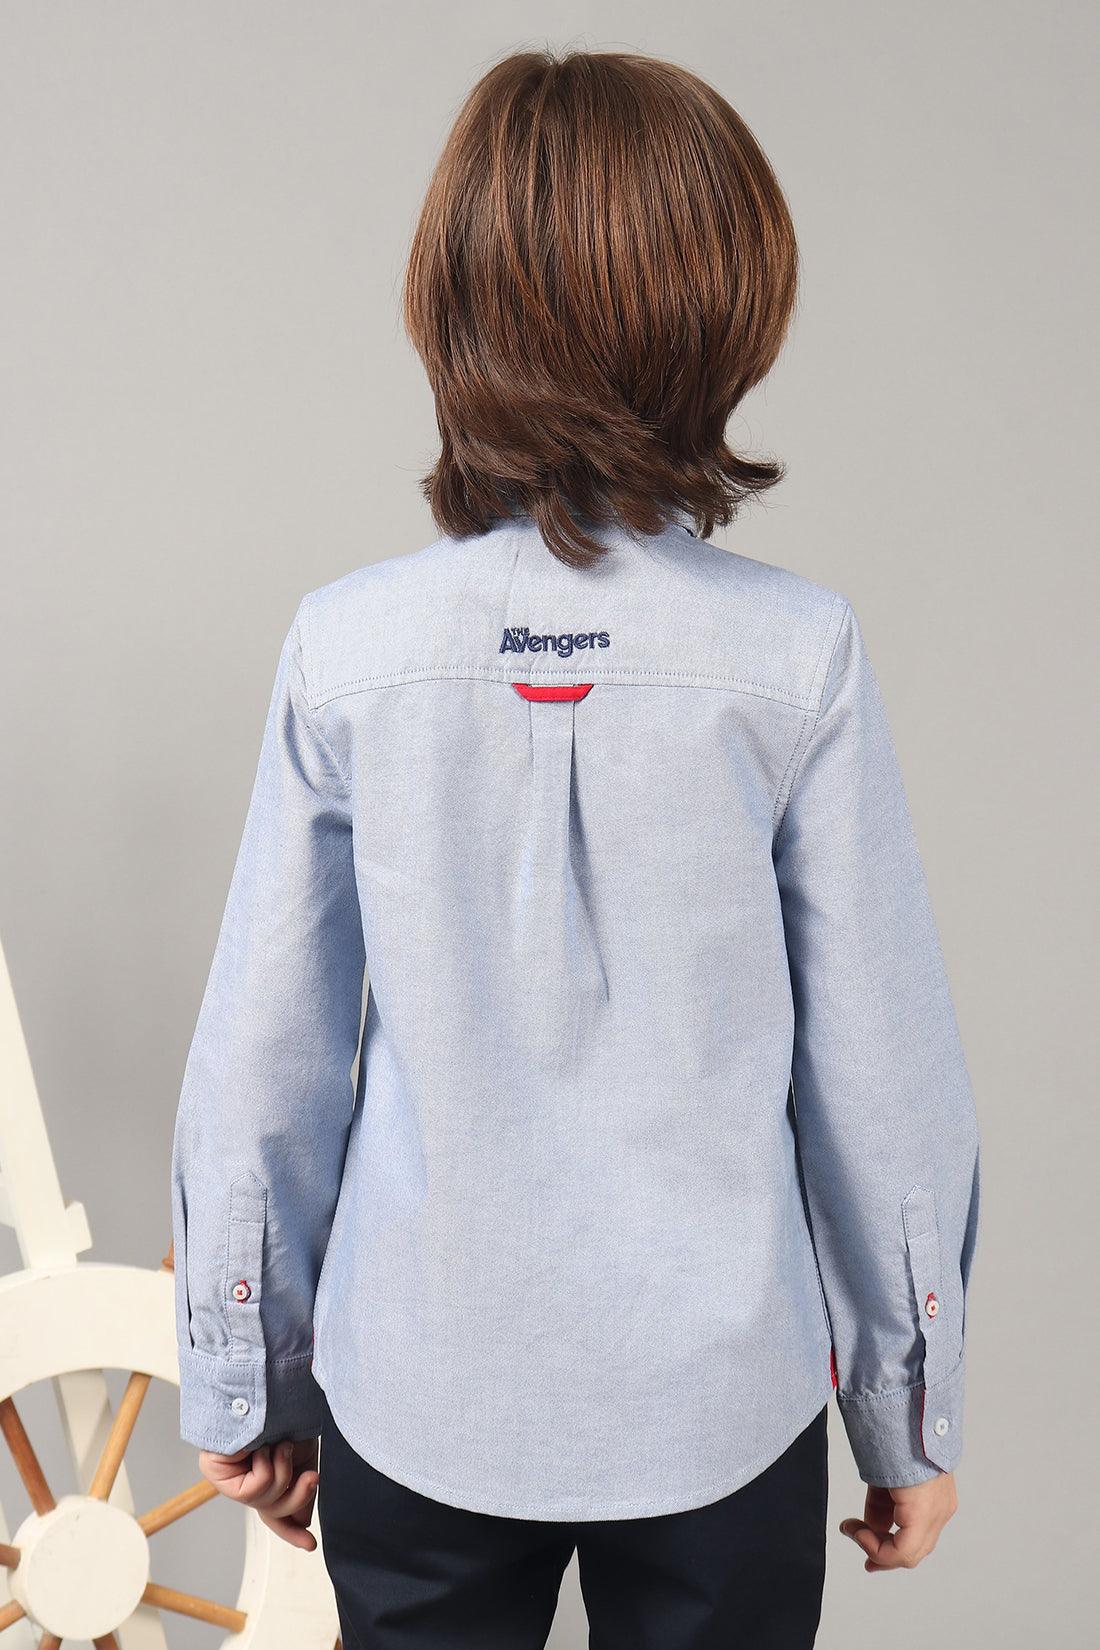 One Friday Kids Boys 100% Cotton Full Sleeve Blue Short With Bow-Tie and Hulk Embroidery